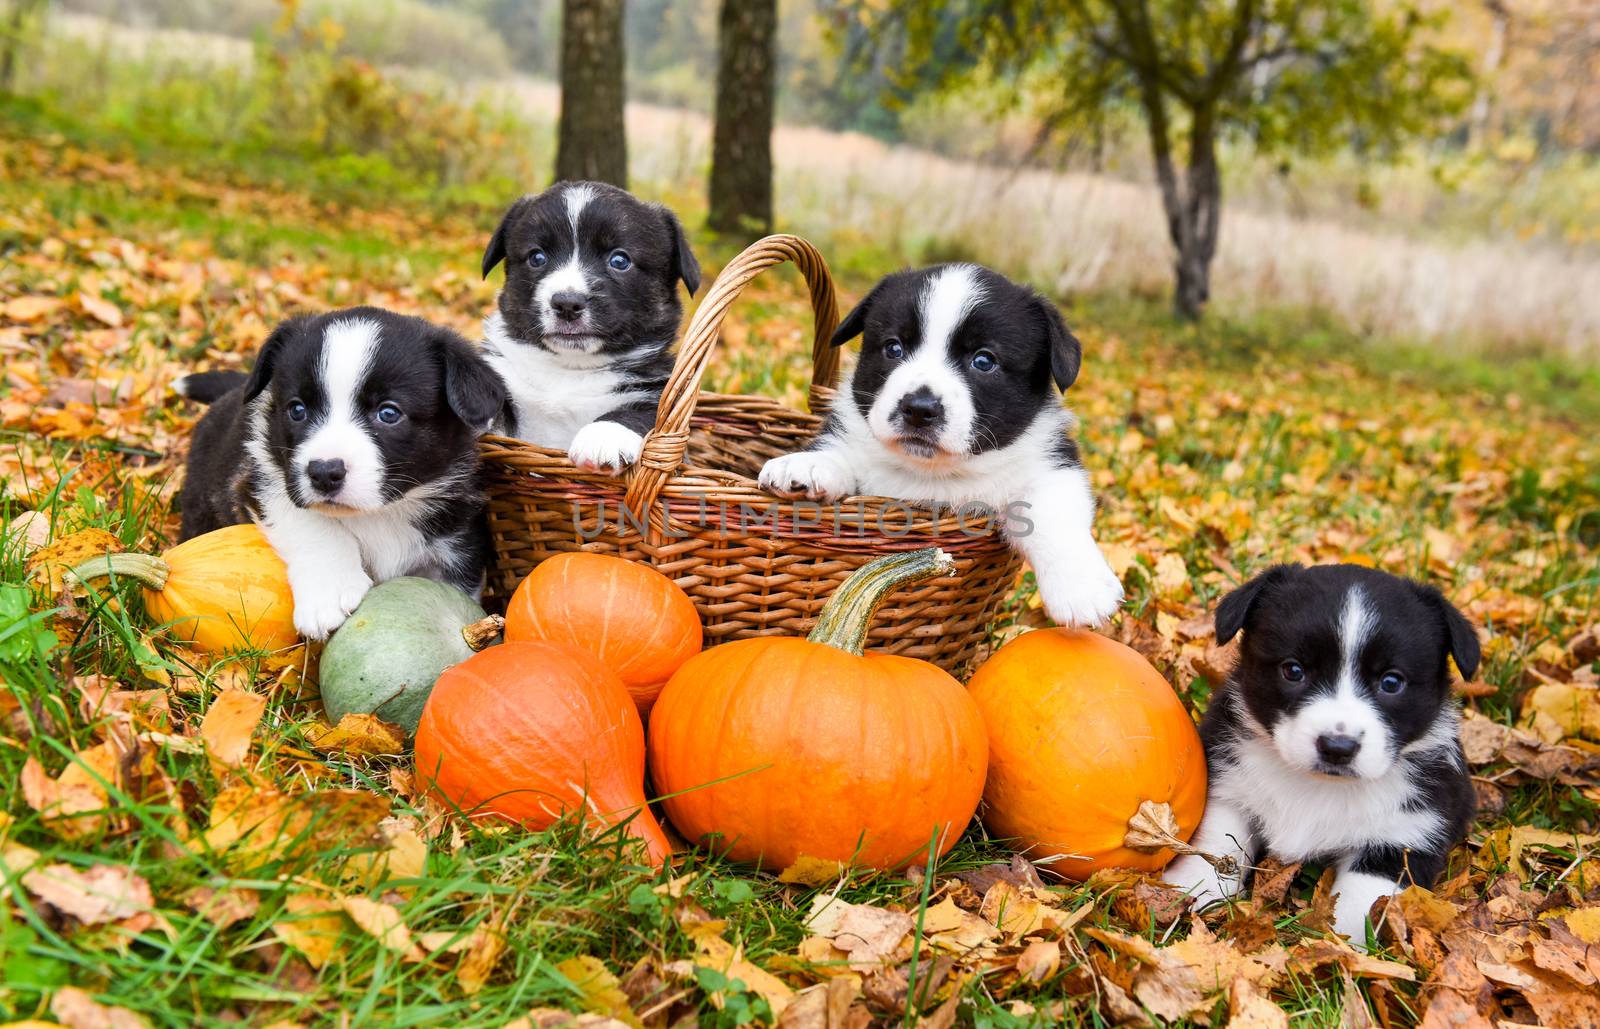 Corgi puppies dogs with a pumpkin on autumn background by infinityyy